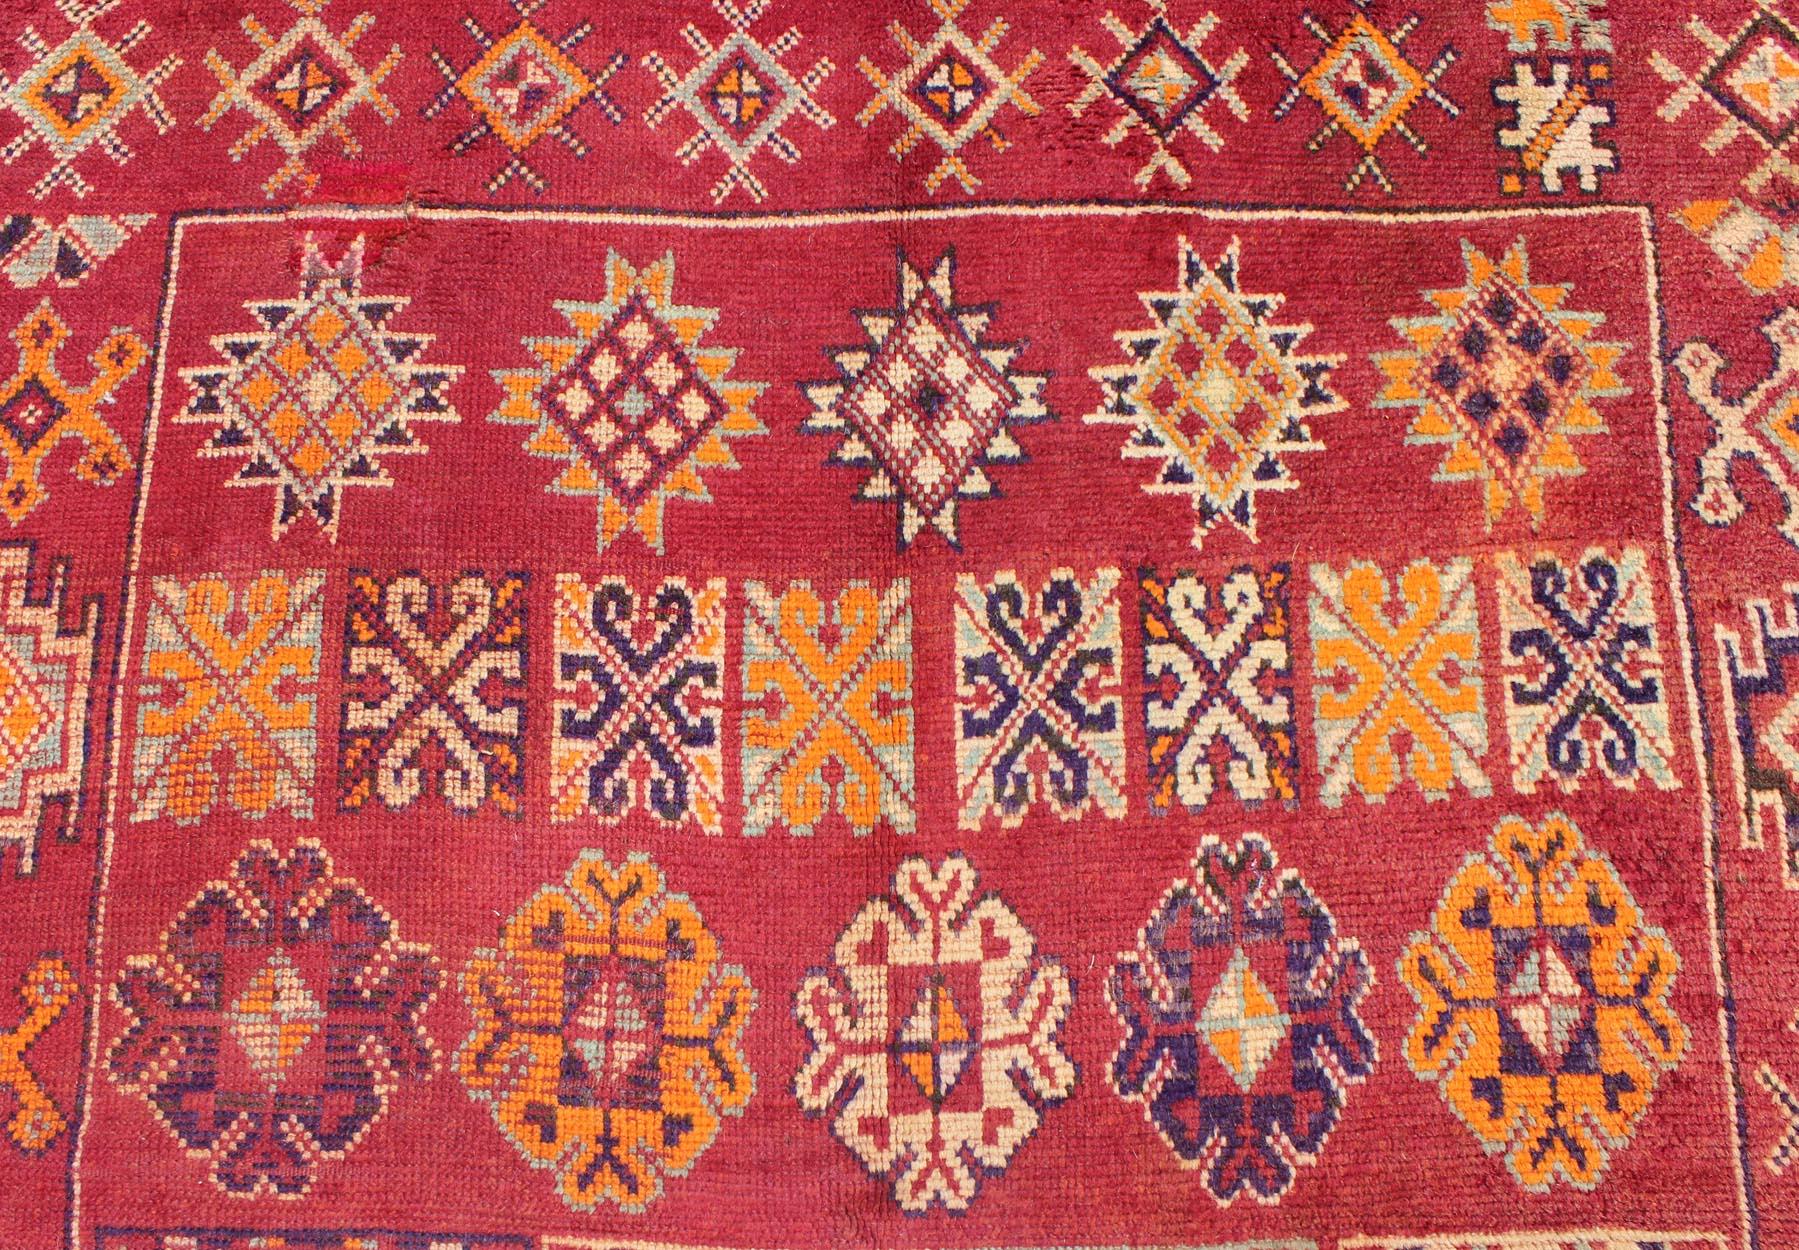 Antique Moroccan Rug in Crimson Red, Orange, Blue and Yellow 1